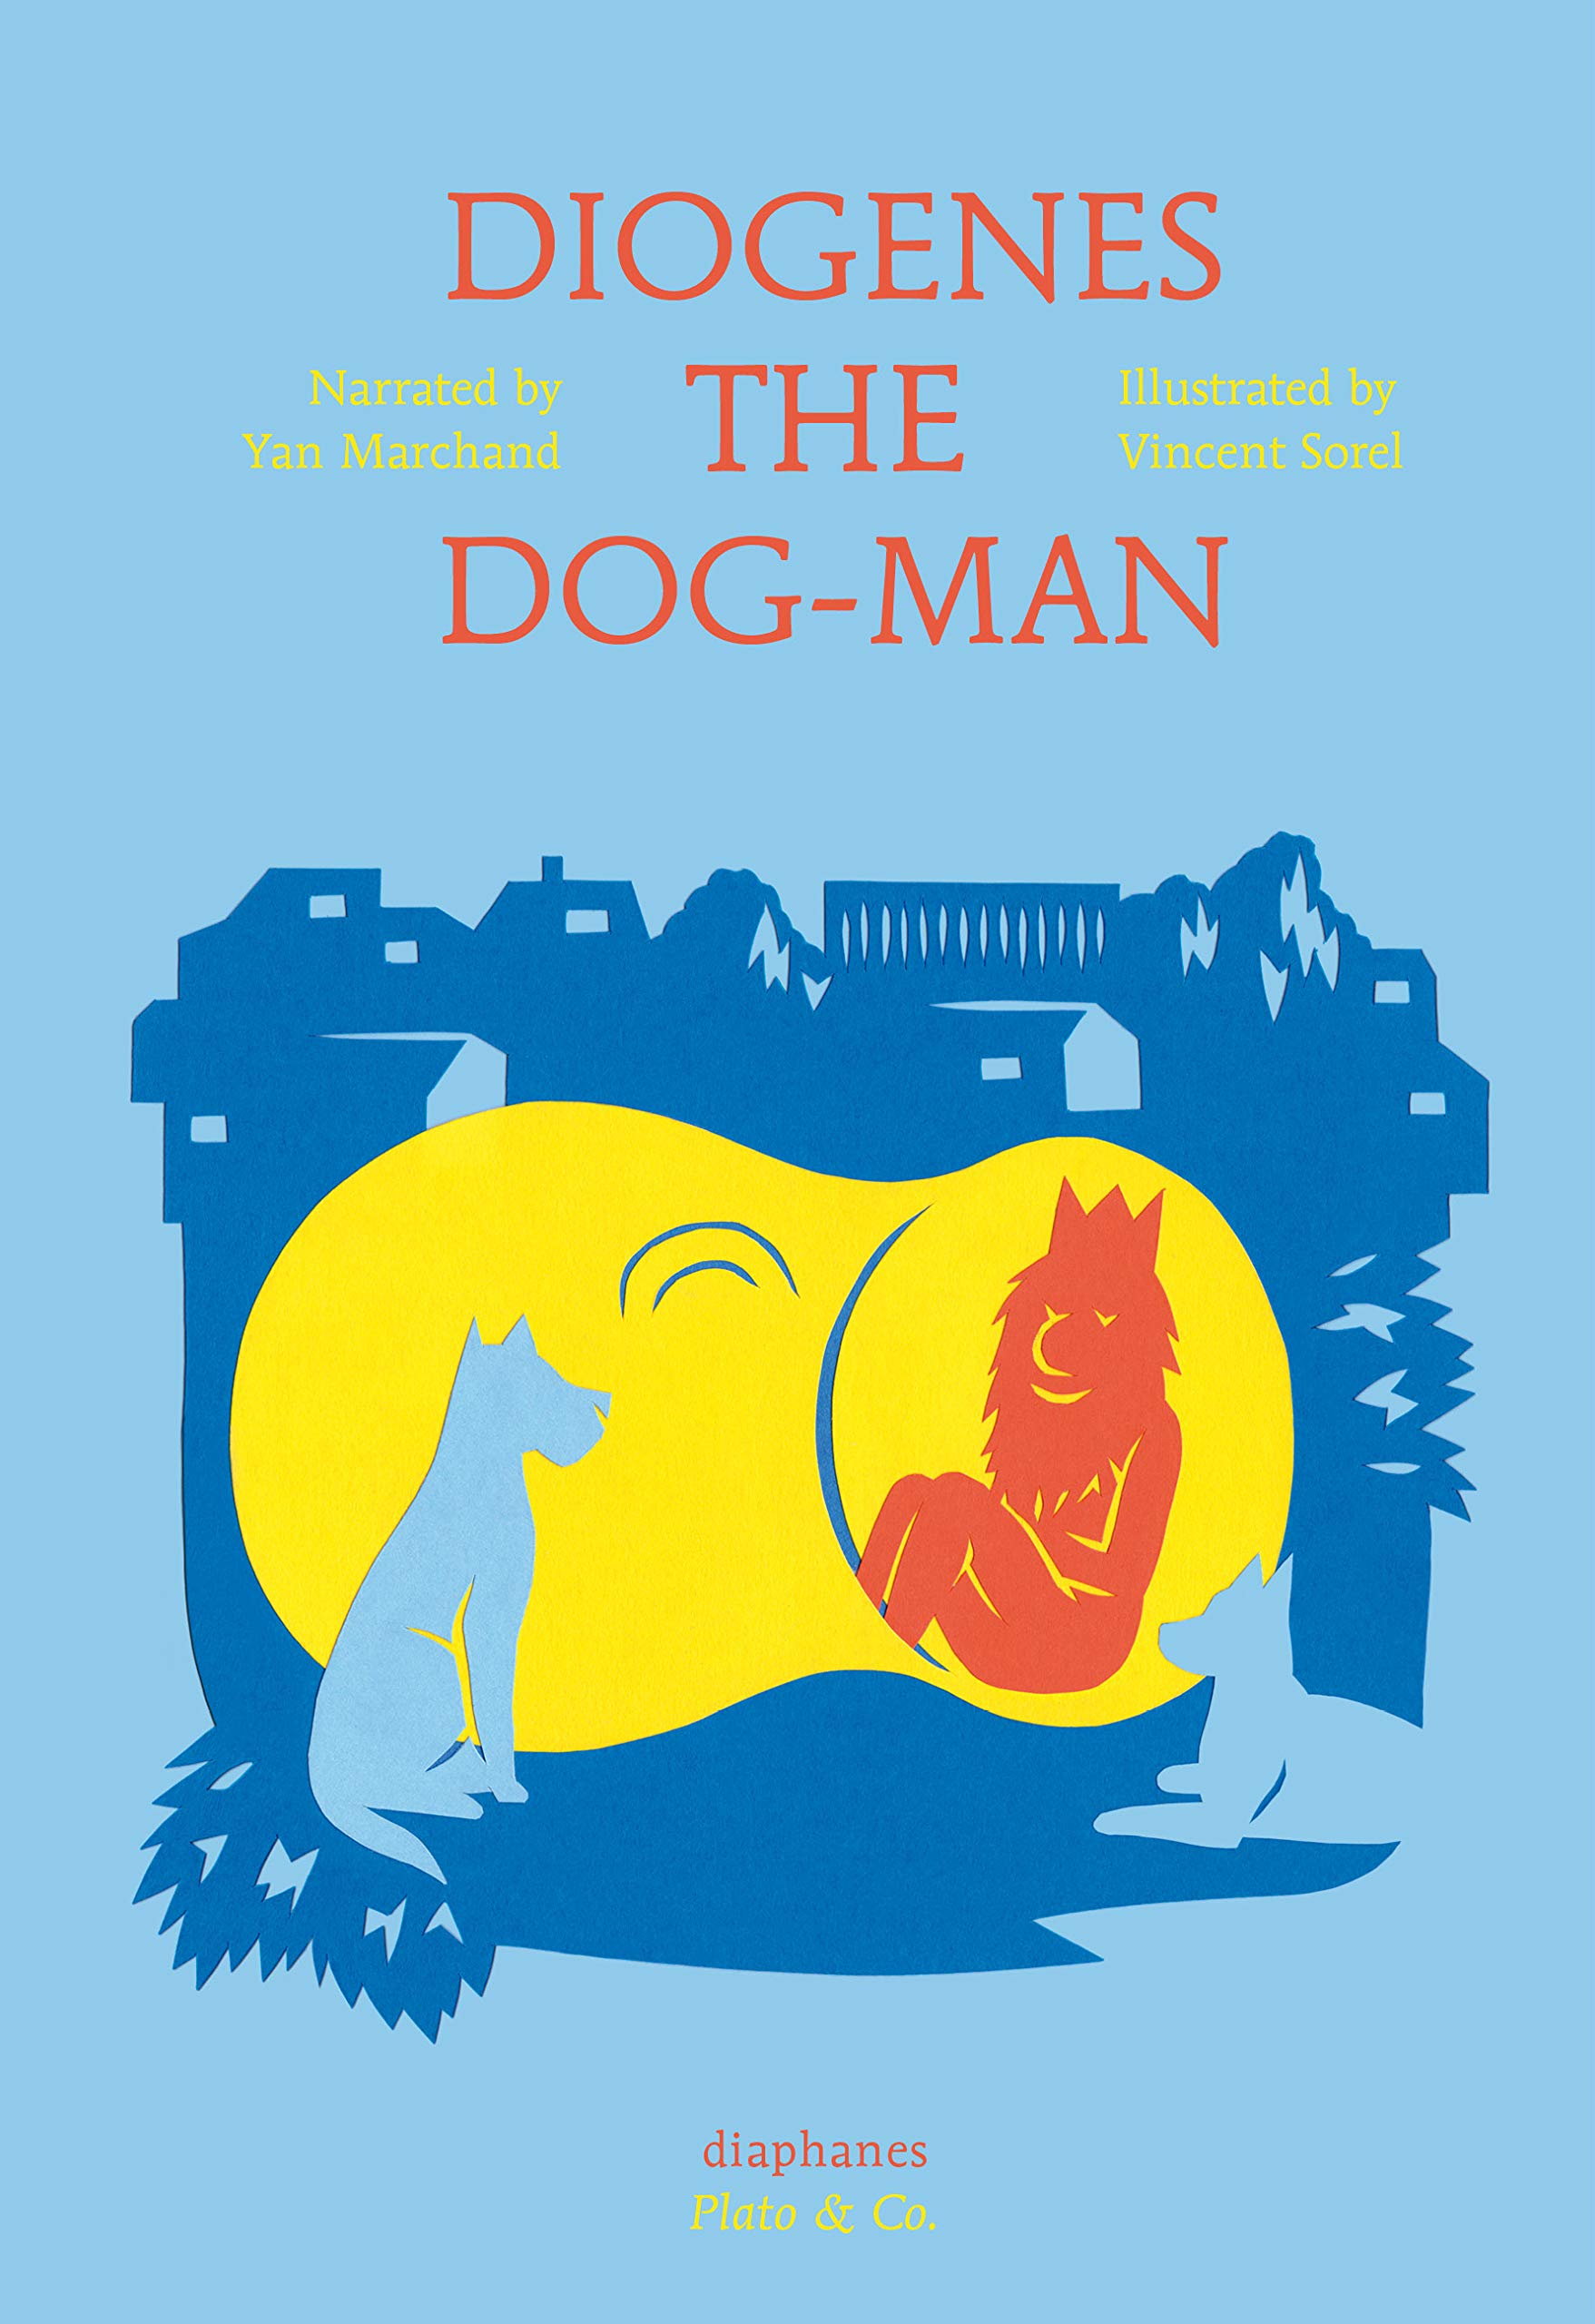 Diogenes the Dog-Man | Yan Marchand image2